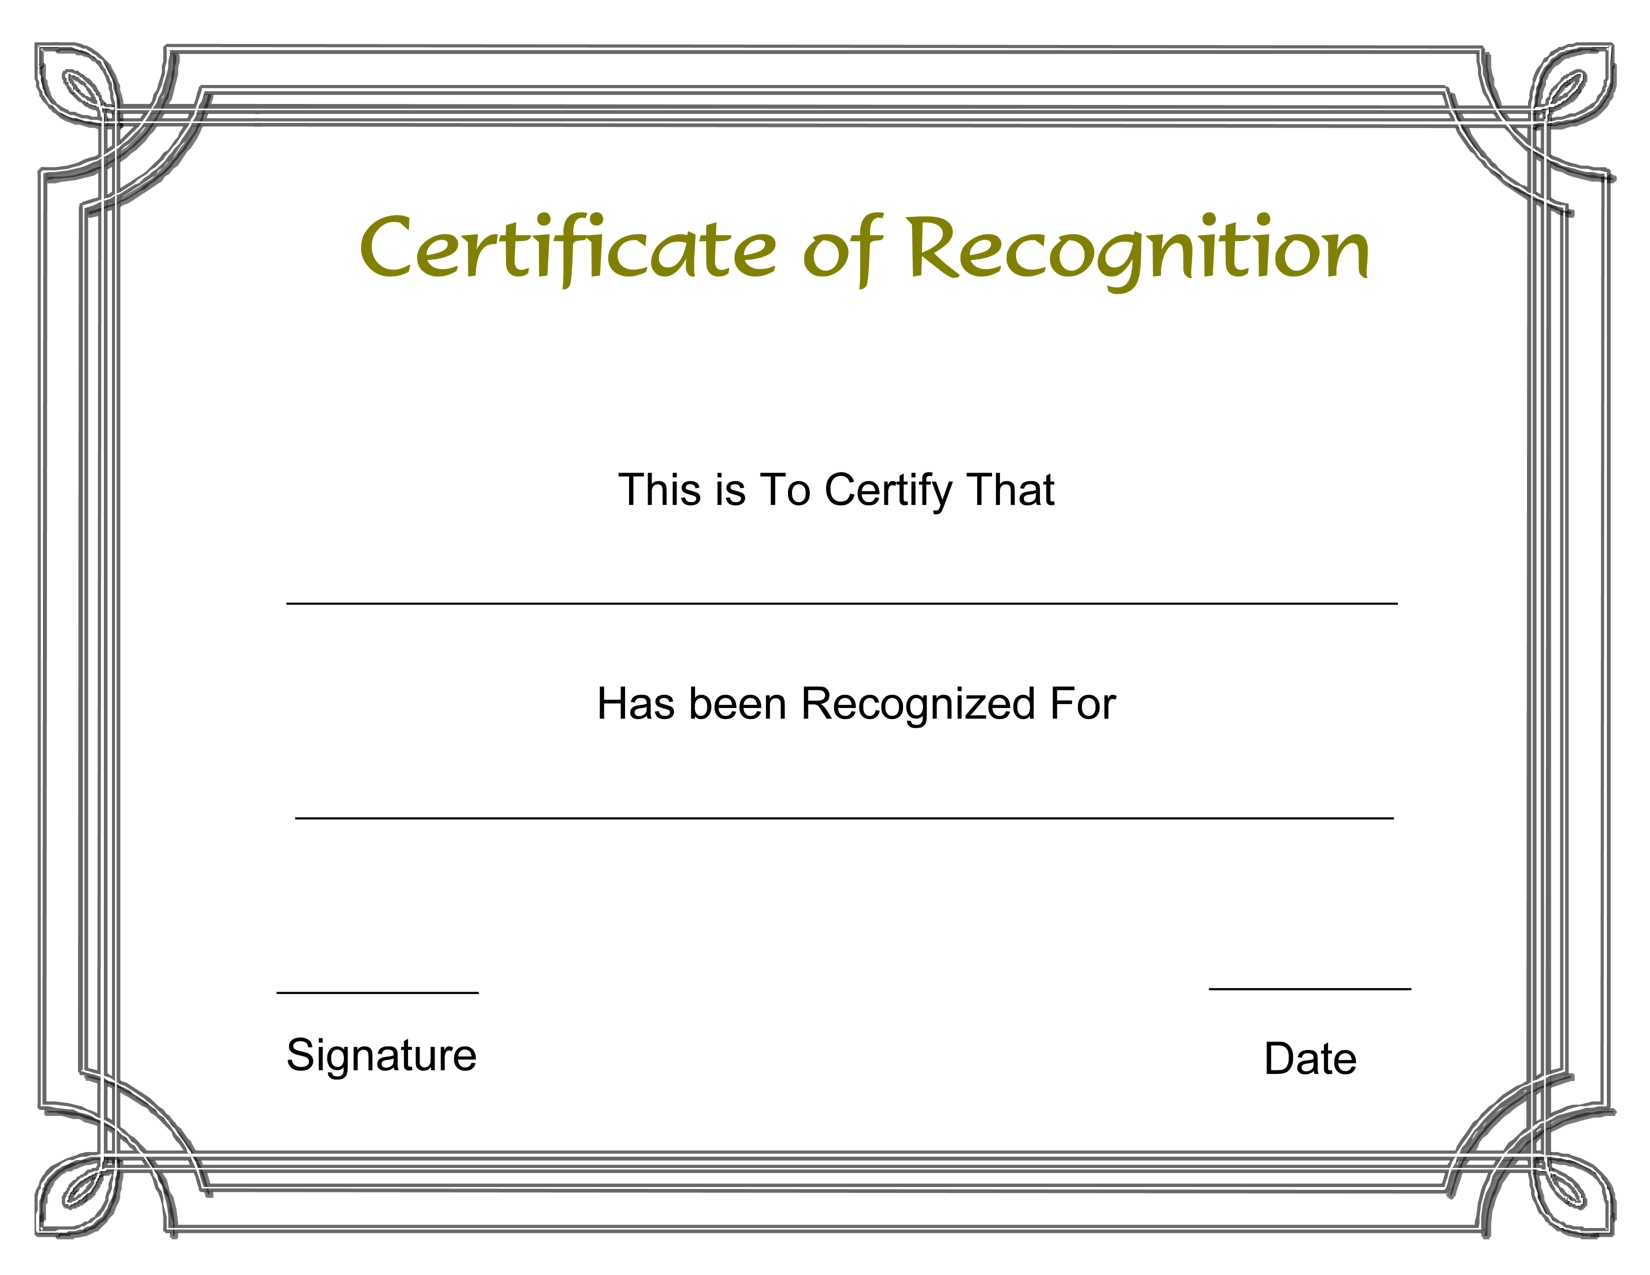 Certificate Template Recognition | Safebest.xyz Throughout Printable Certificate Of Recognition Templates Free